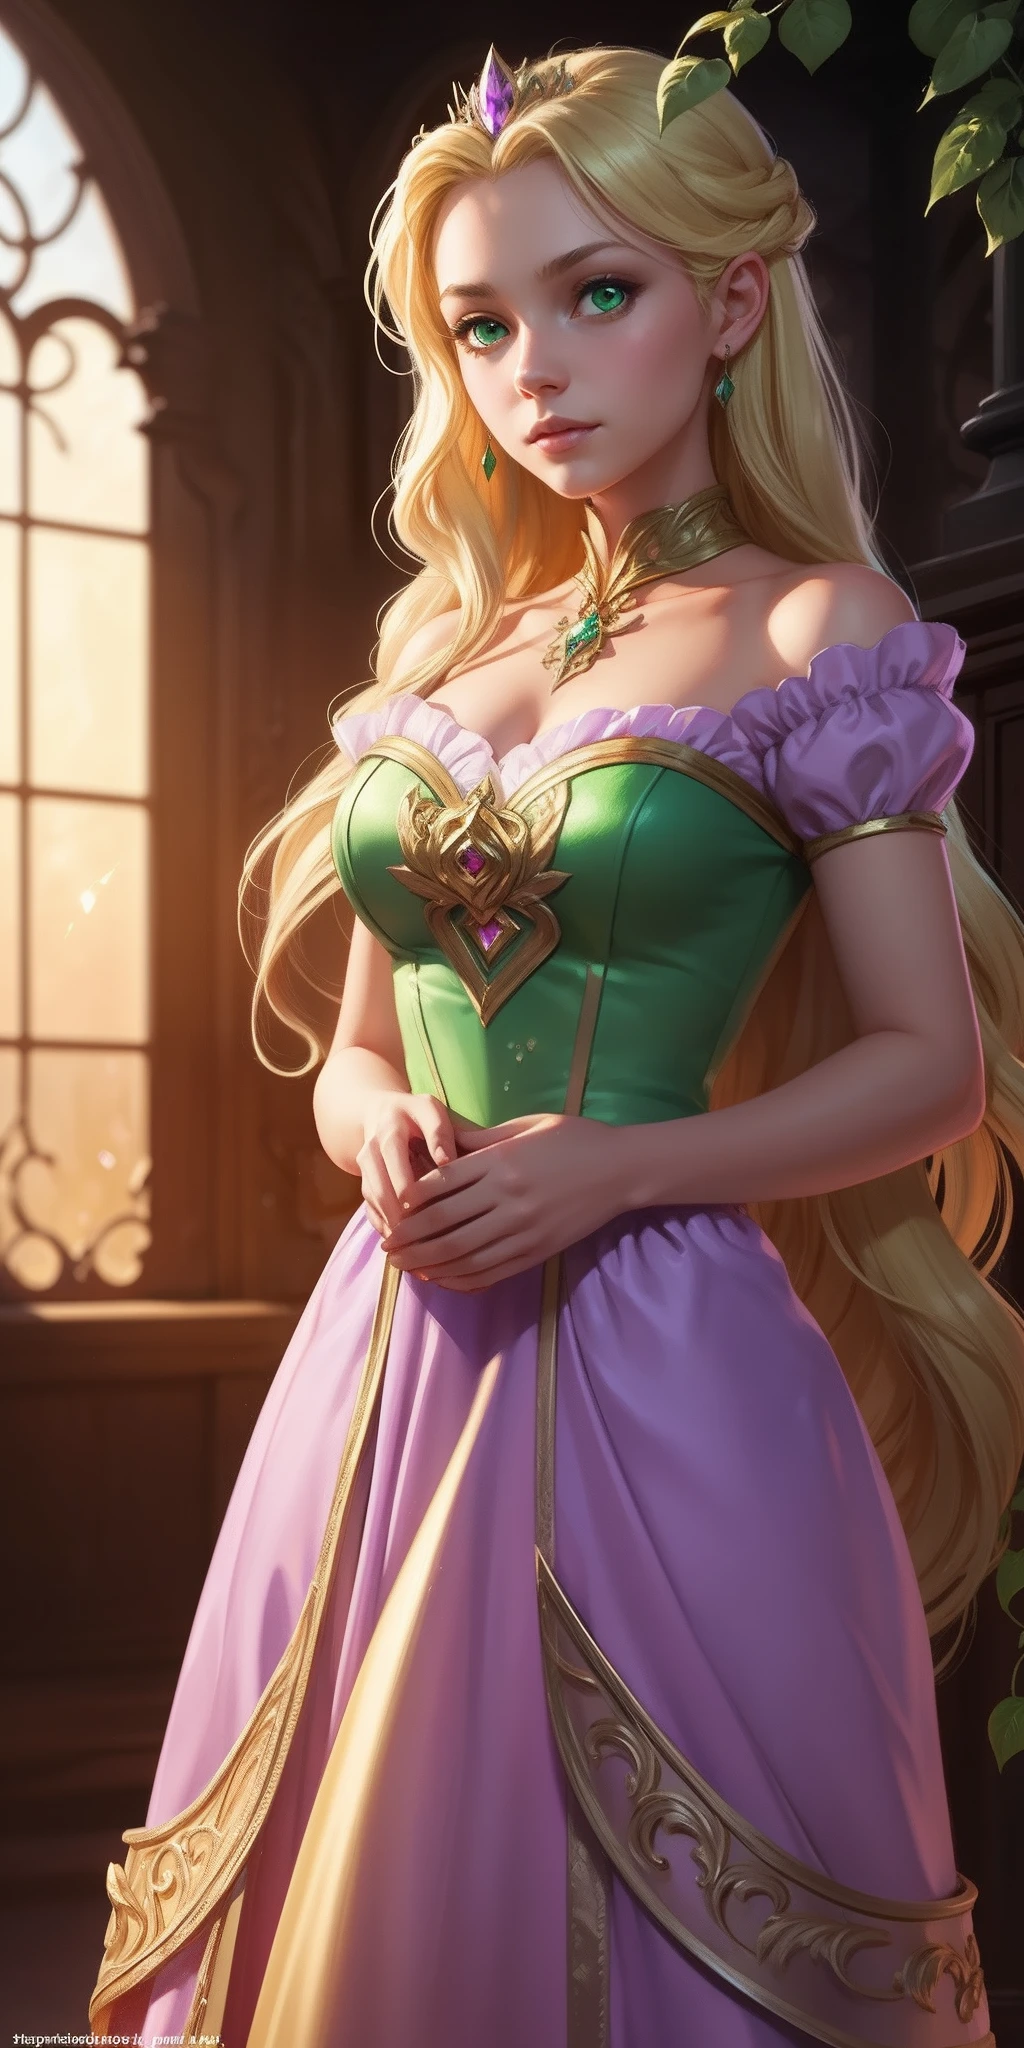 Flower Princess, Rapunzel, Beautiful, Glowing yellow glow, Long blonde hair, Green eyes, Lilac dress, Green ivy, Nice young face, Soft tan skin,Art germ, Ultra-detailed and sophisticated Gothic art trends in Artstation's ternary colors, Fantastical, intricately details, Splash screen, Complementary colors, fantasy concept art,